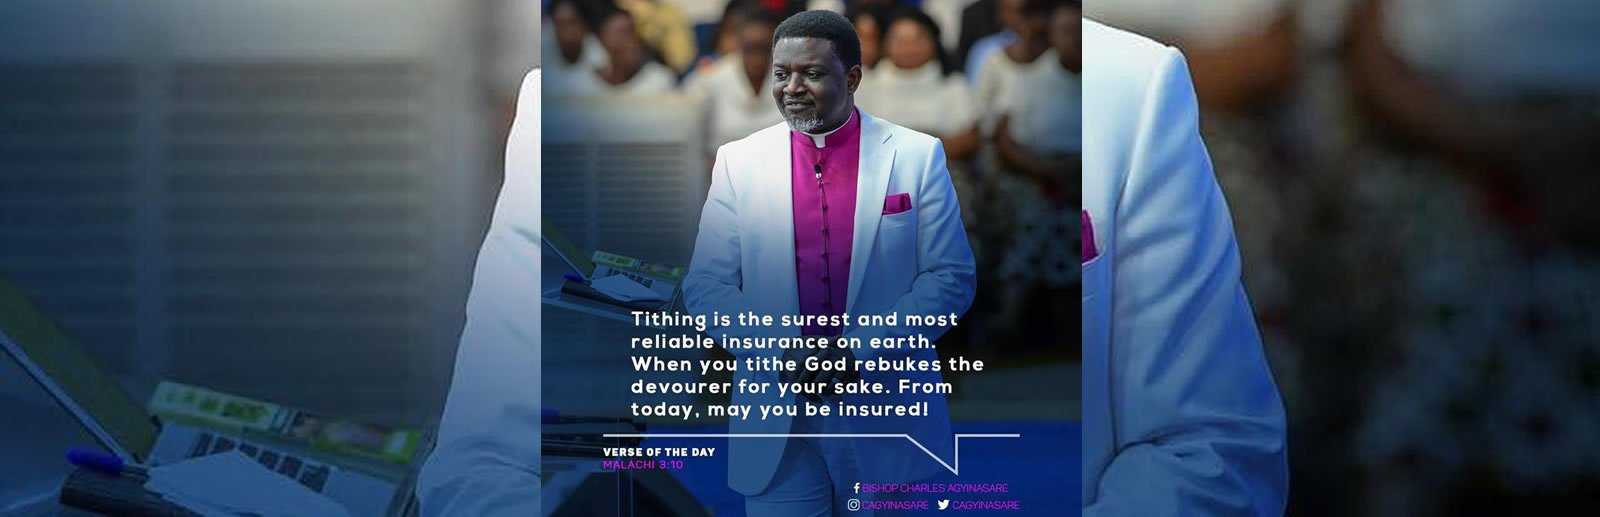 Pay your Tithes - Bishop Charles Agyinasare